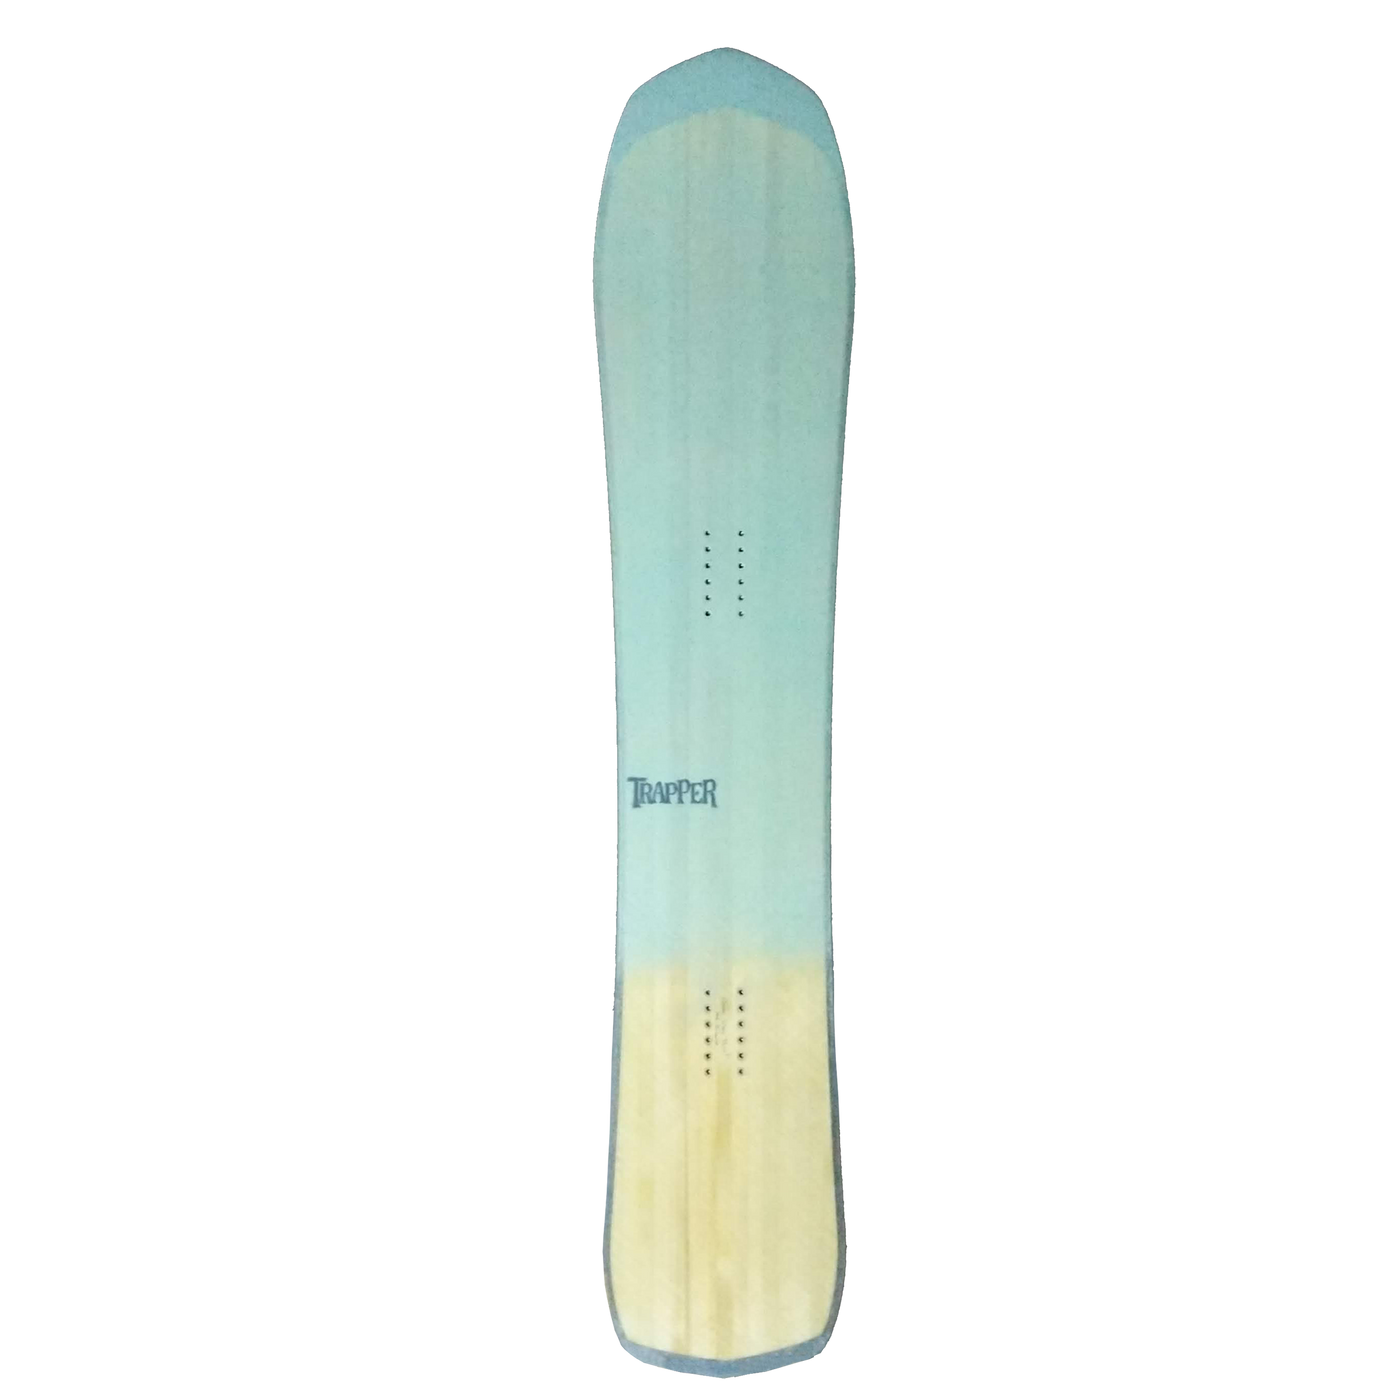 Custom Powder and carving snowboard with mint green resin tint on woodgrain